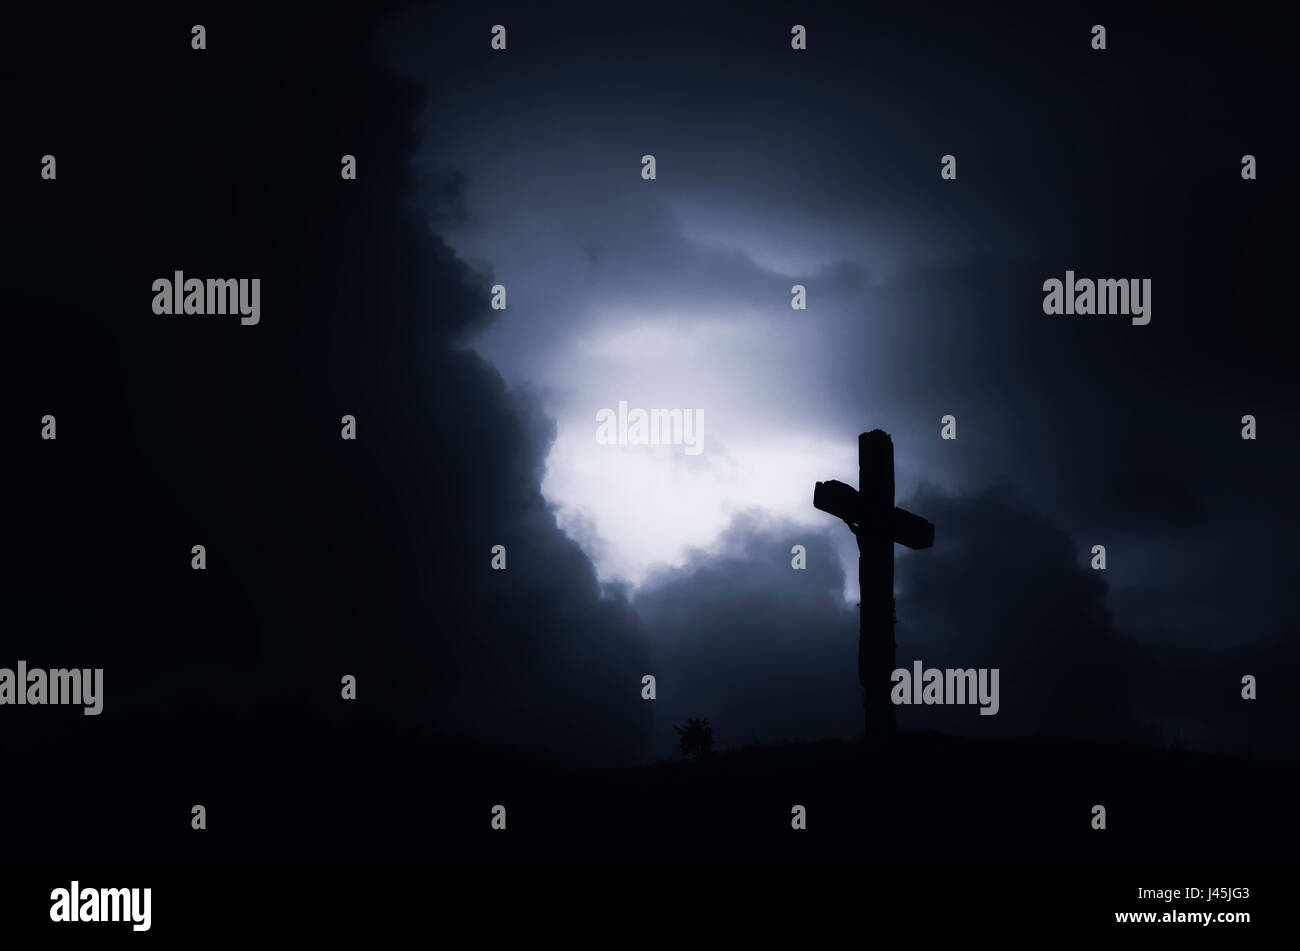 dark scary landscape with cross silhouette on hill with storm clouds at night Stock Photo